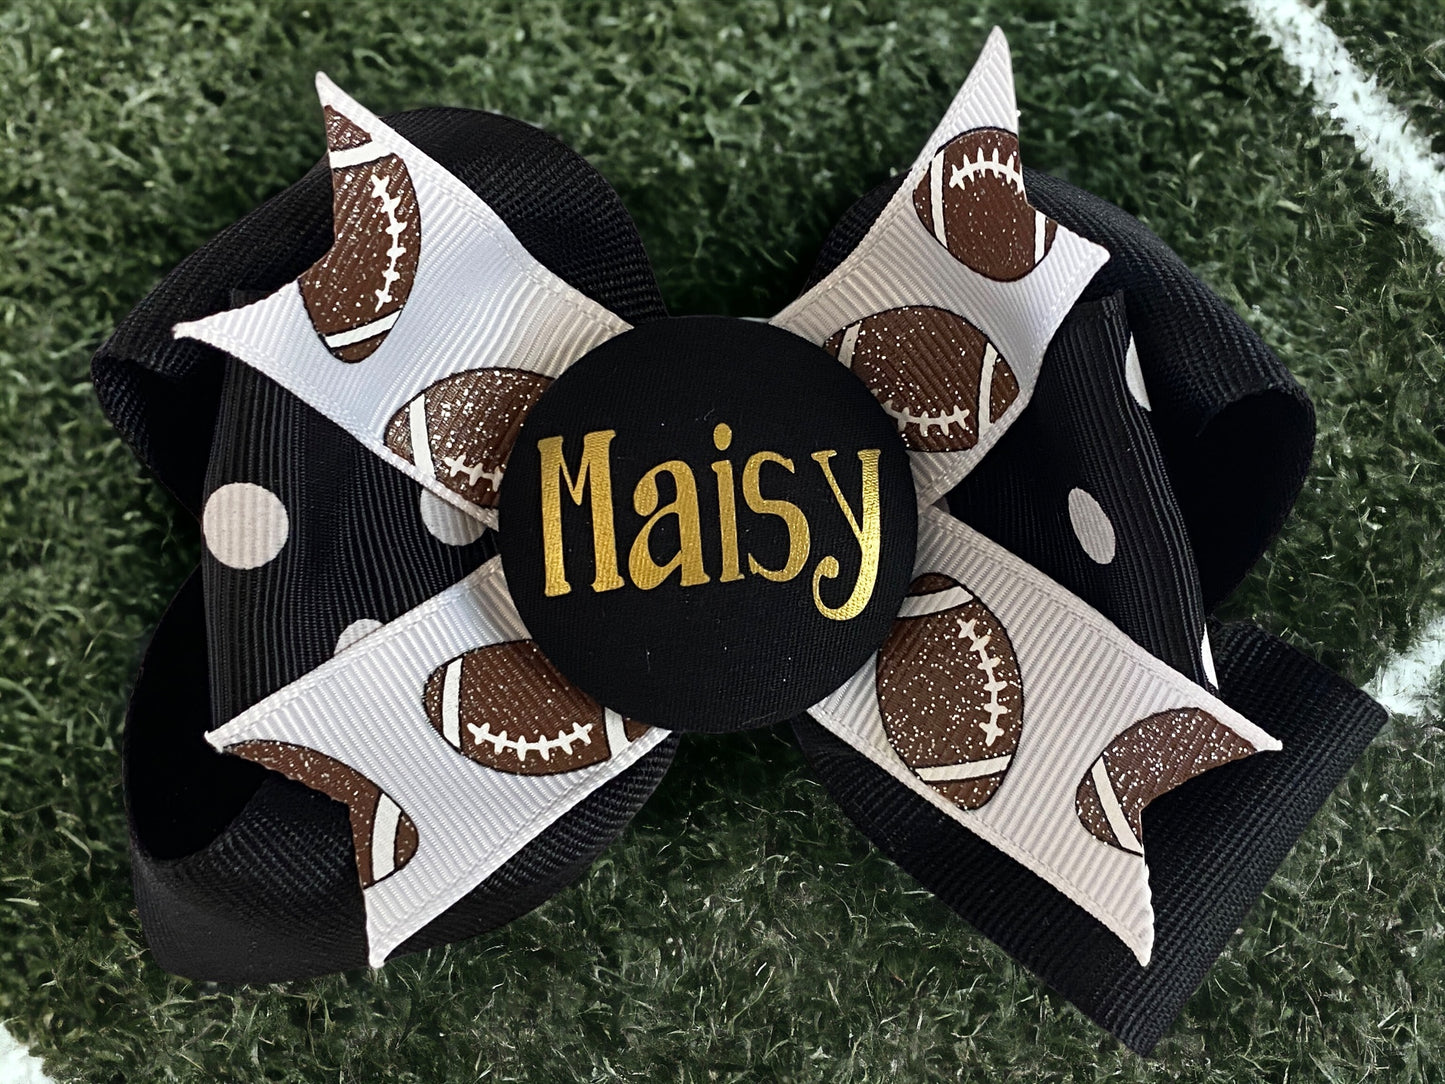 Personalized Sport Hair Bow Clip or Ponytail for Girls Team